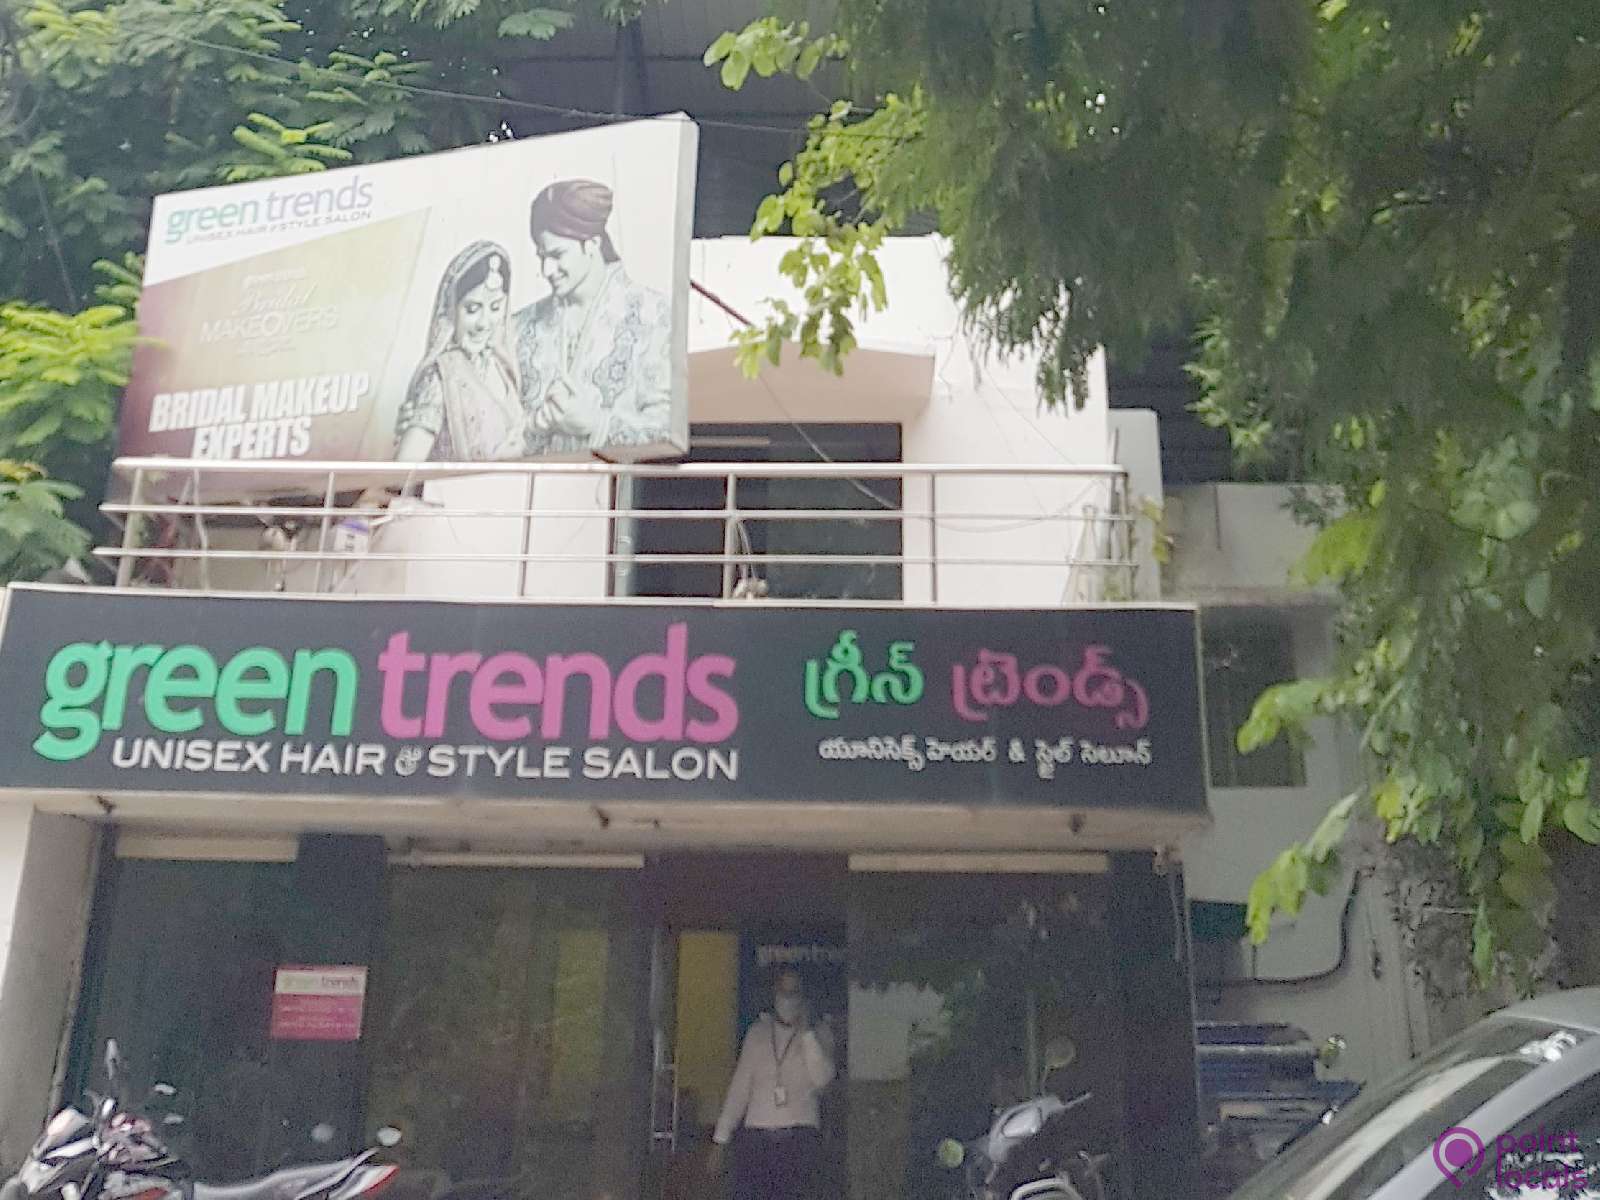 Green Trends Unisex Hair and Style Salon - Green Trends Salon in  Secunderabad,Telangana | Pointlocals